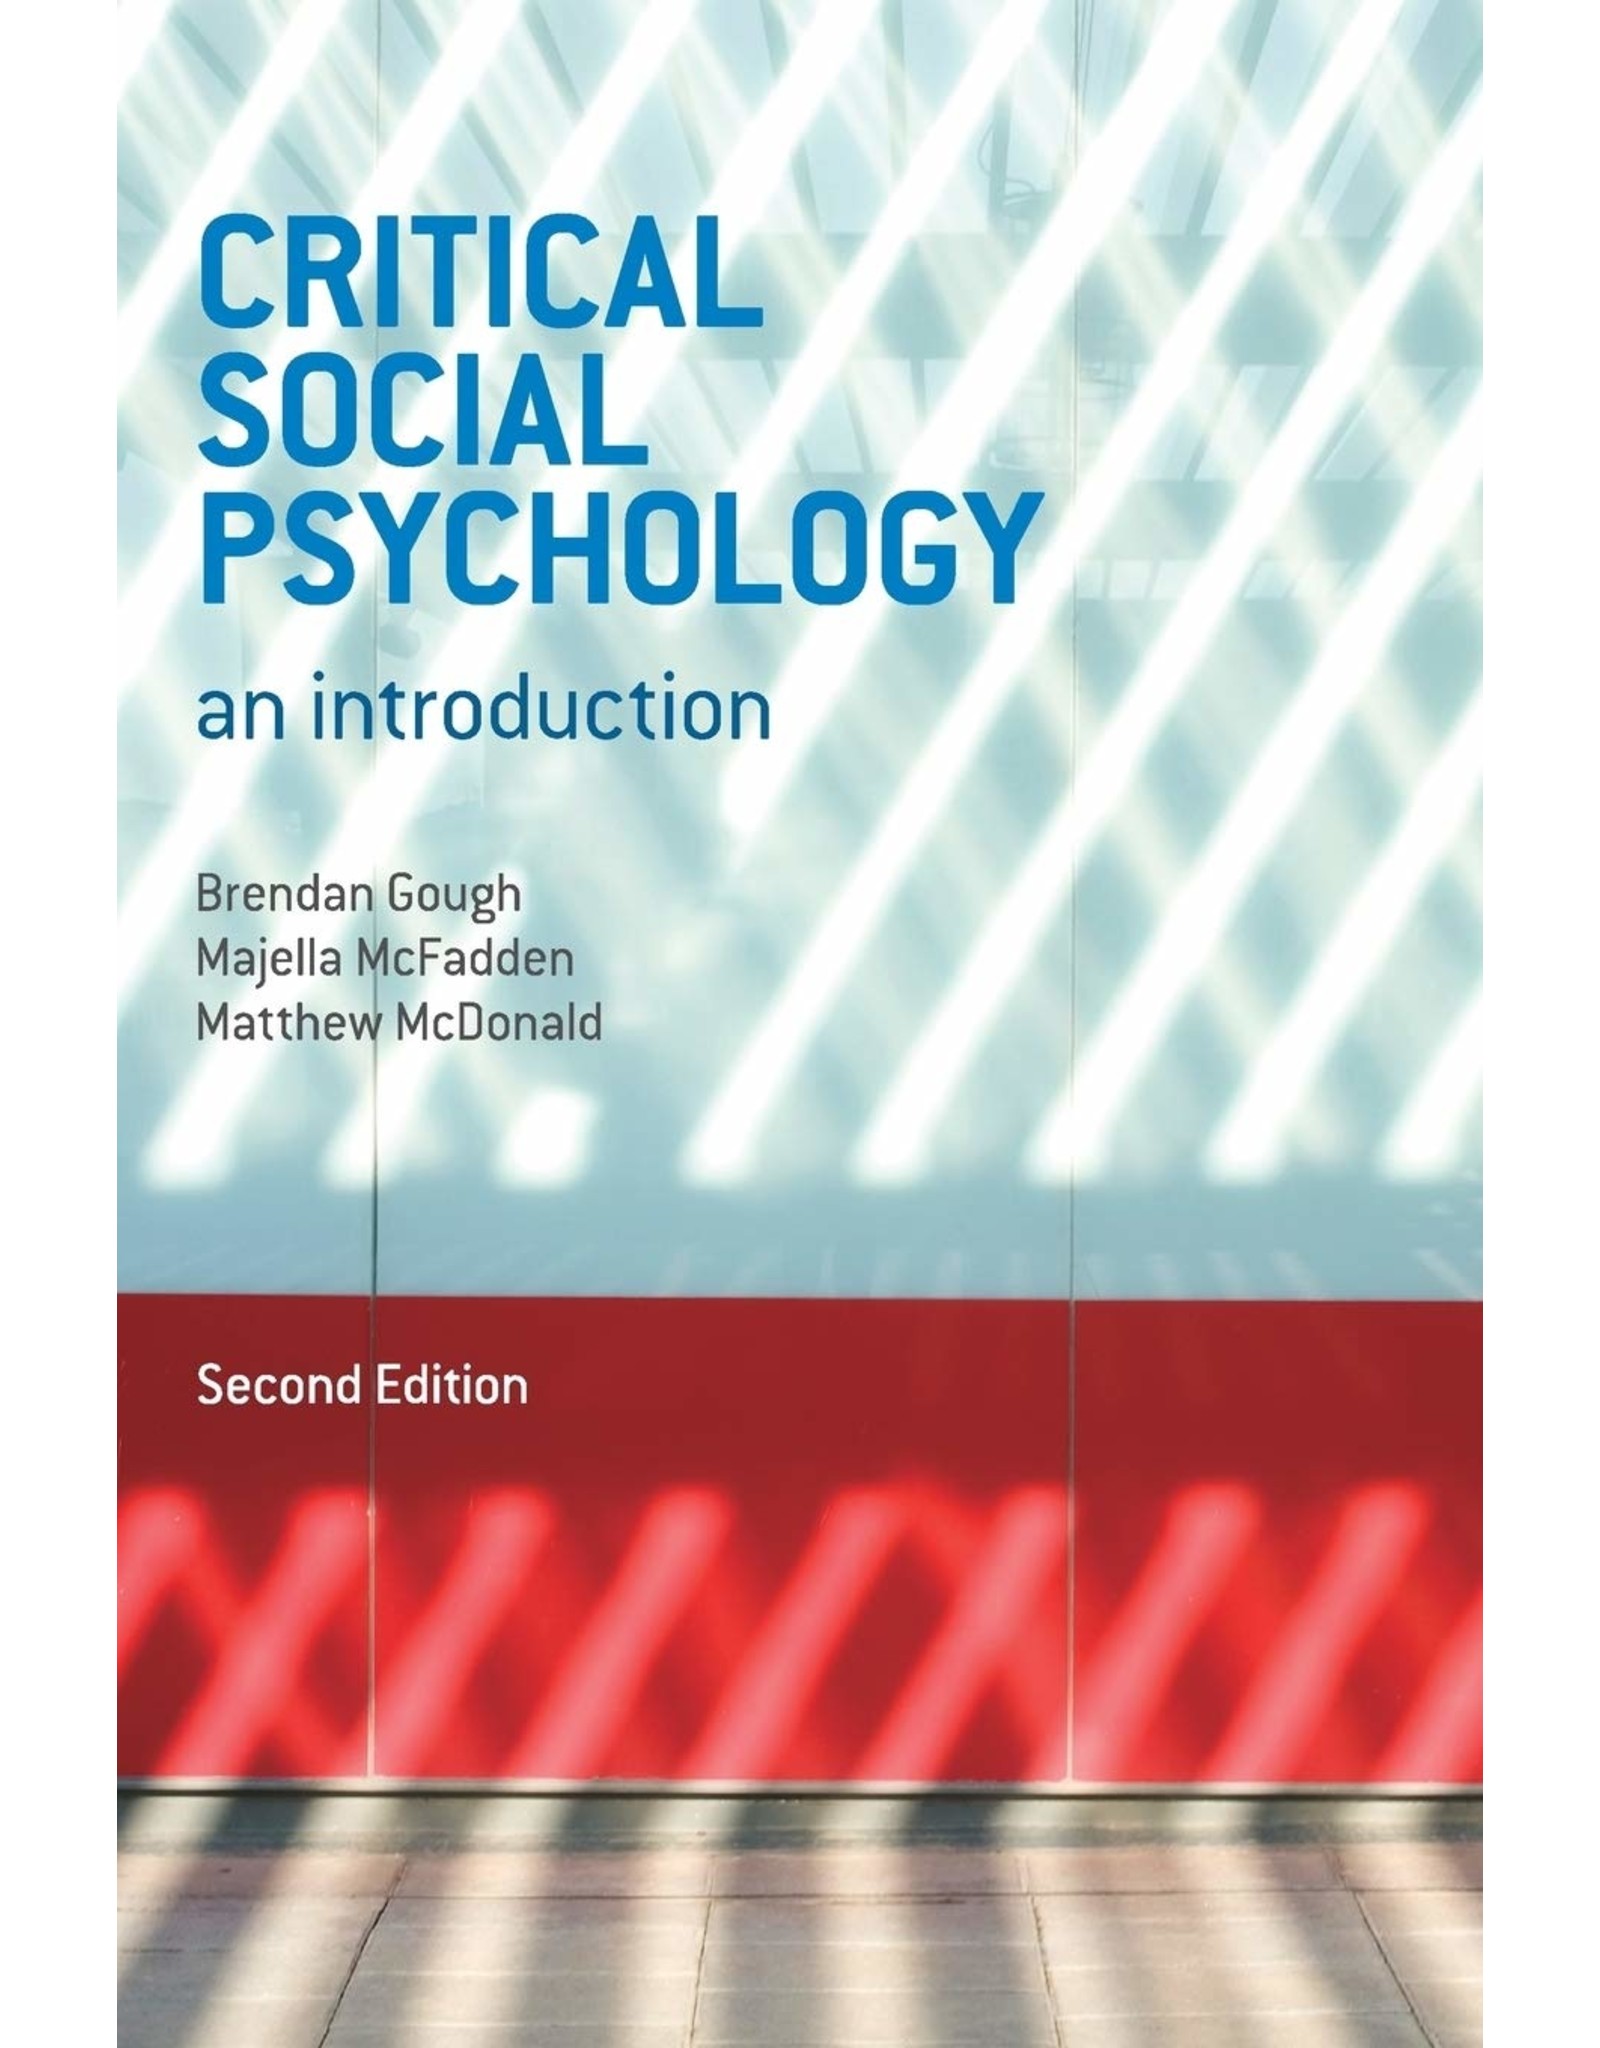 Textbook Critical Social Psychology: An Introduction, 2nd Edition